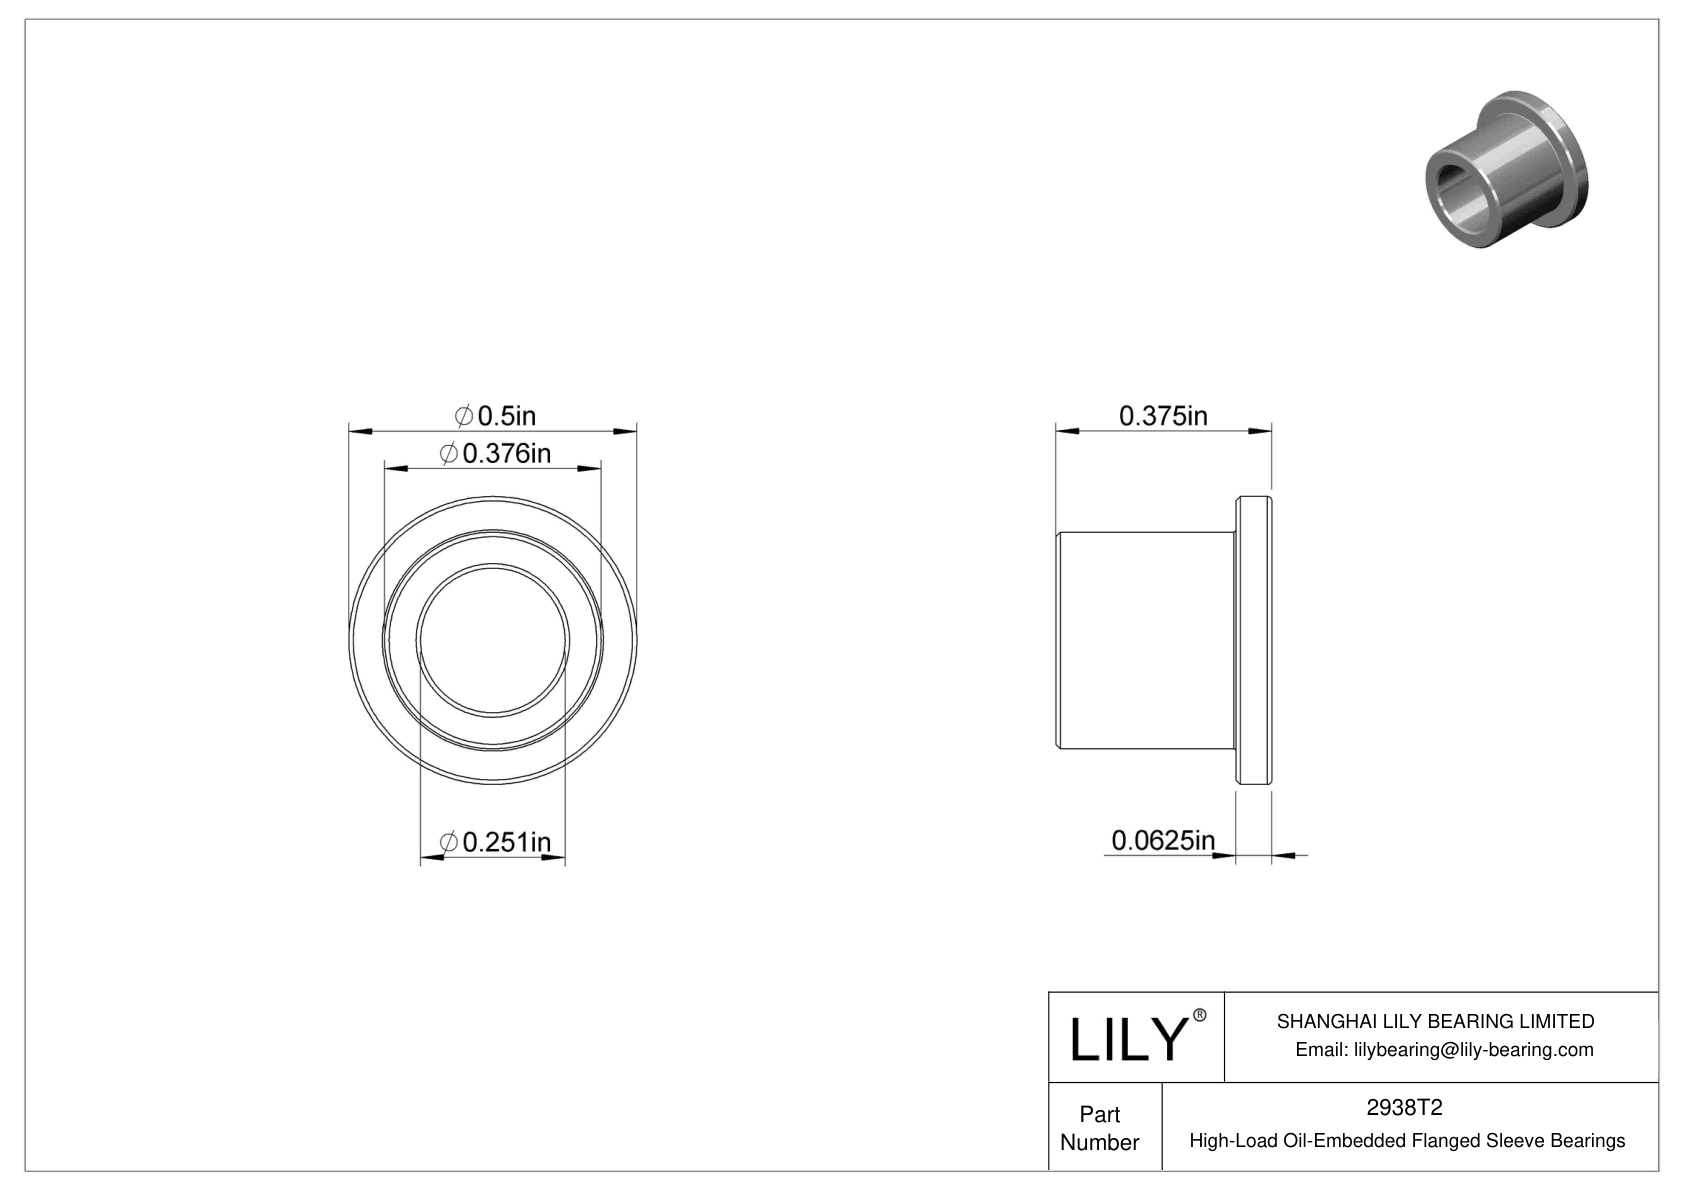 CJDITC High-Load Oil-Embedded Flanged Sleeve Bearings cad drawing